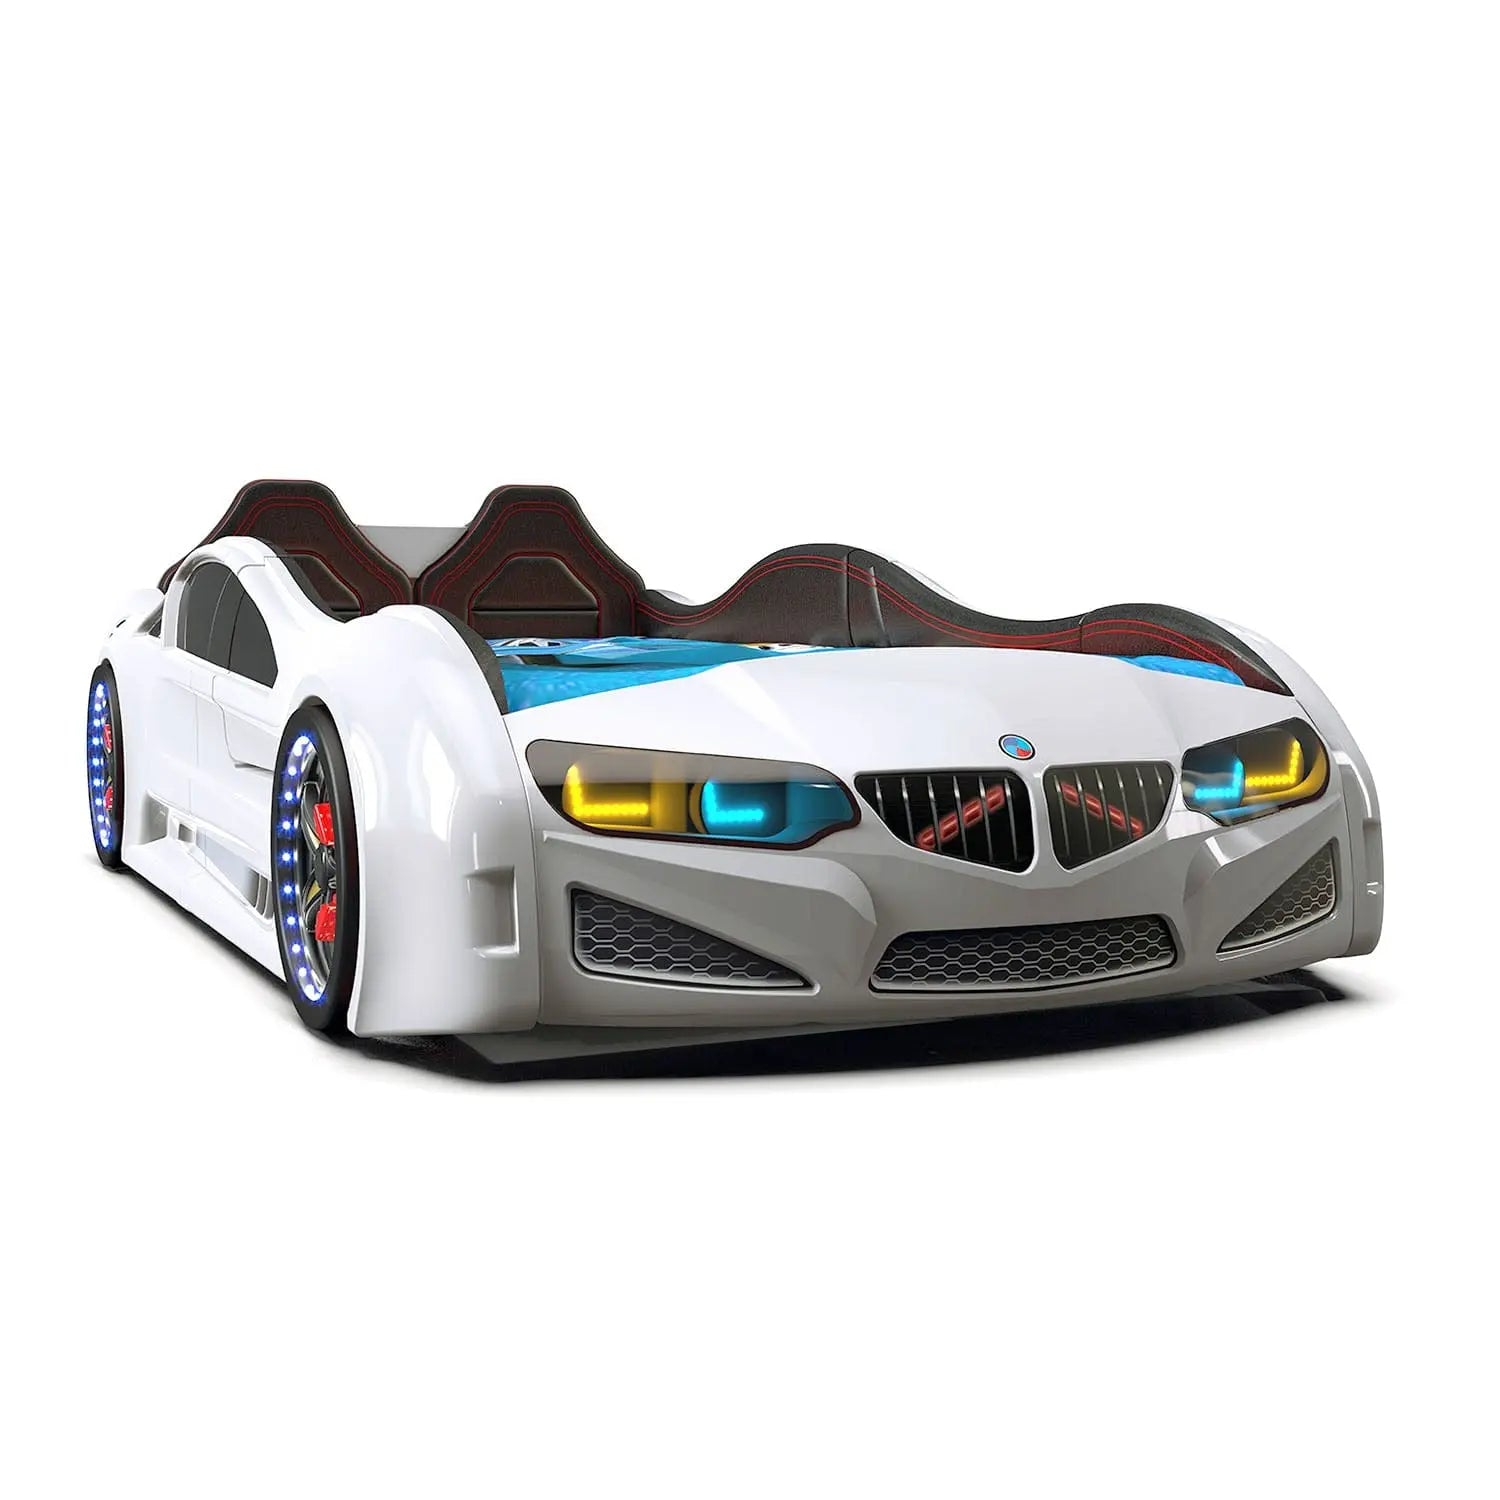 Beamer MZ Car Bed, Racing Headlights, Remote Control, Toddler Twin Size Frame